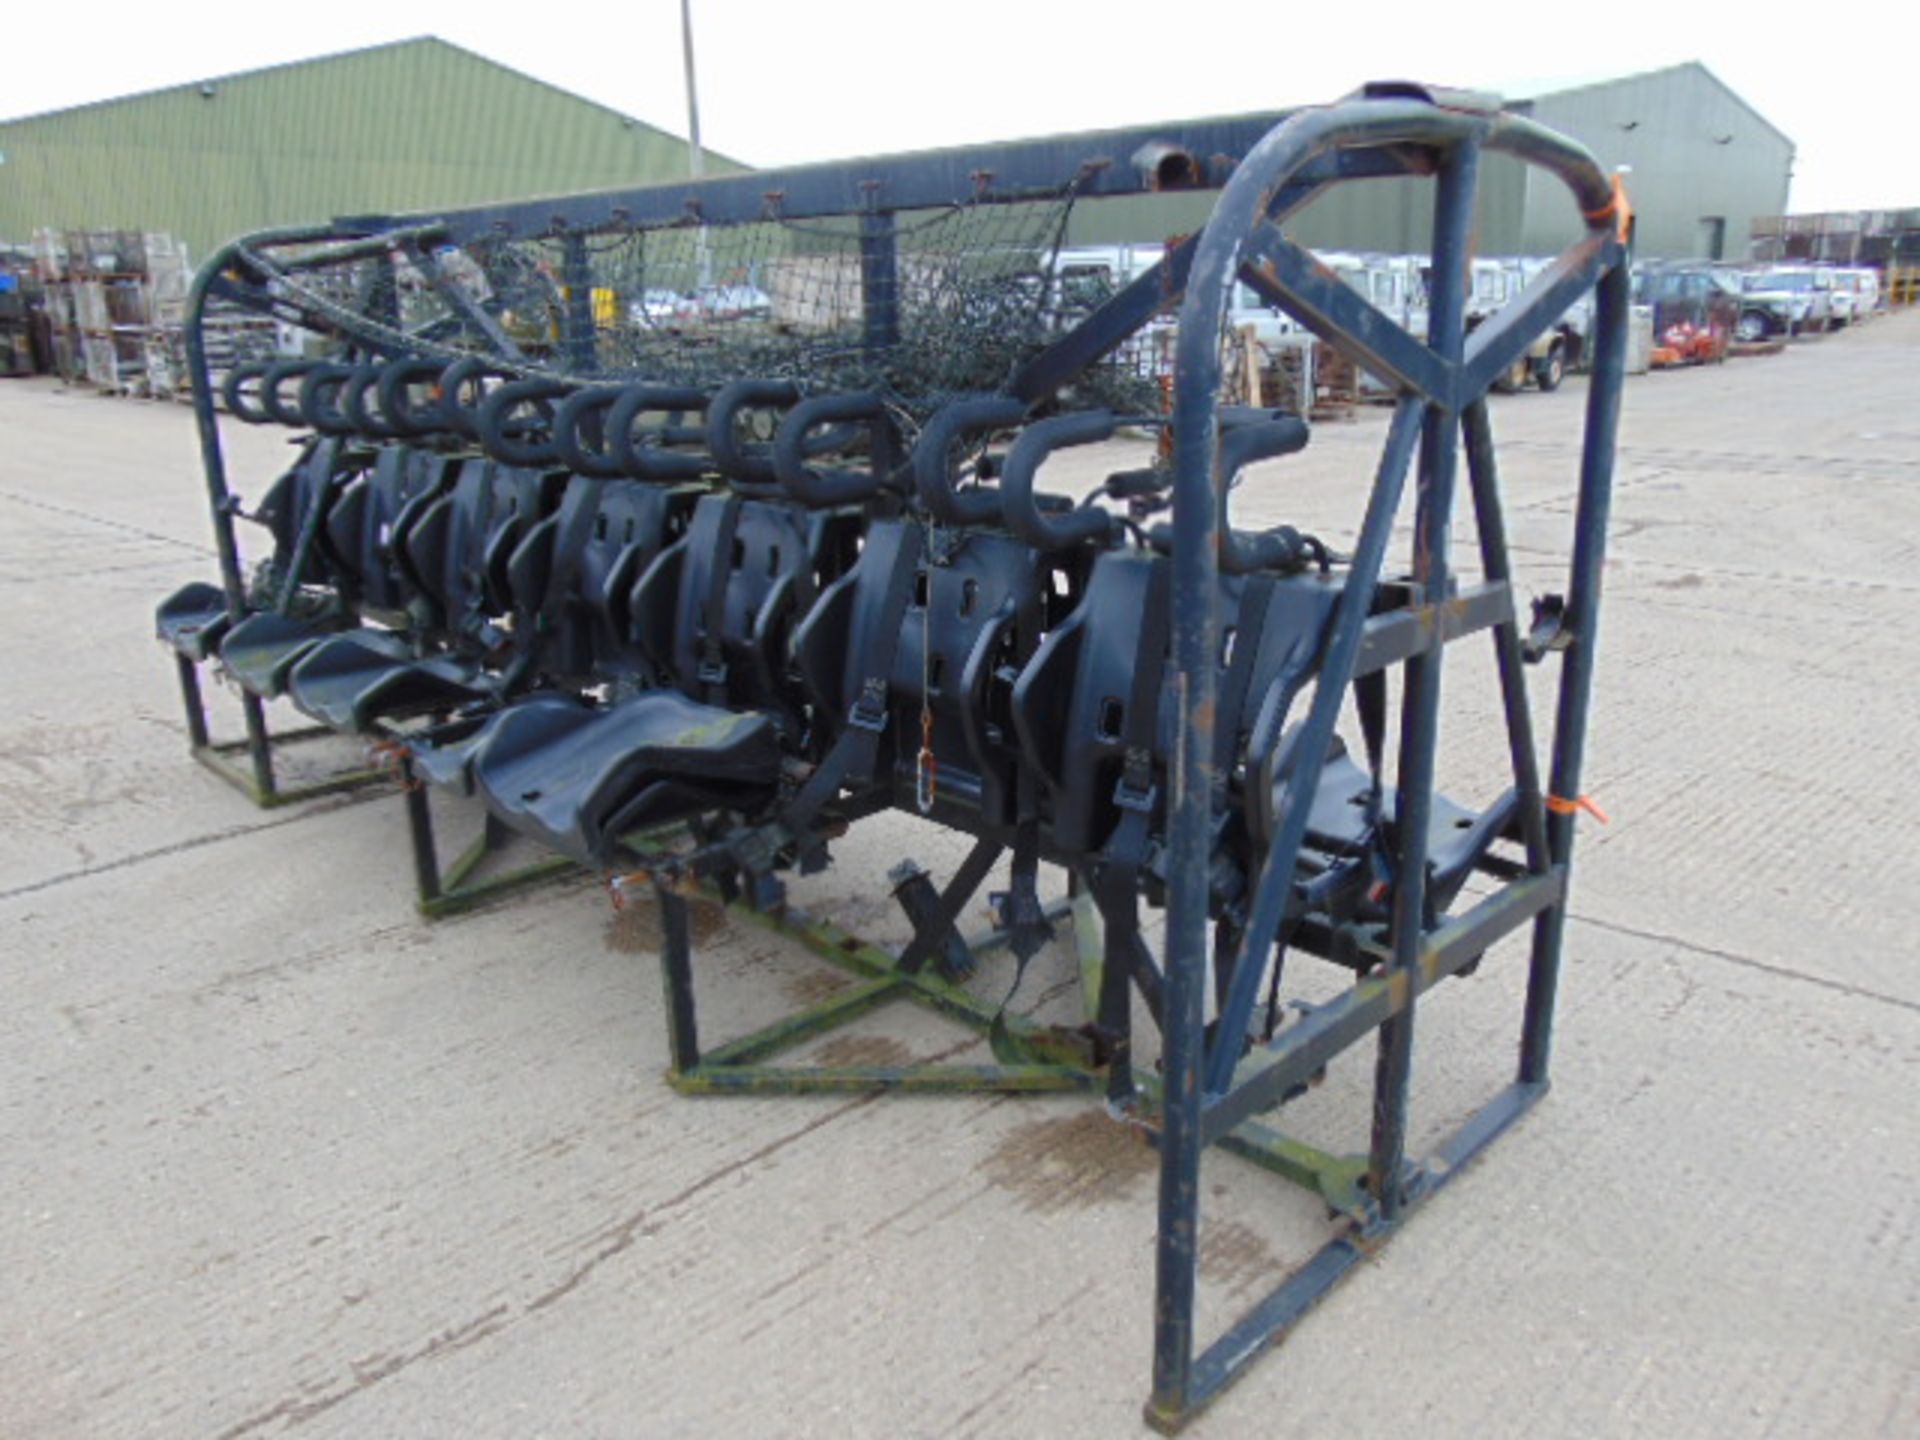 14 Man ROPS Security Seat suitable for Leyland Dafs, Bedfords etc - Image 5 of 5